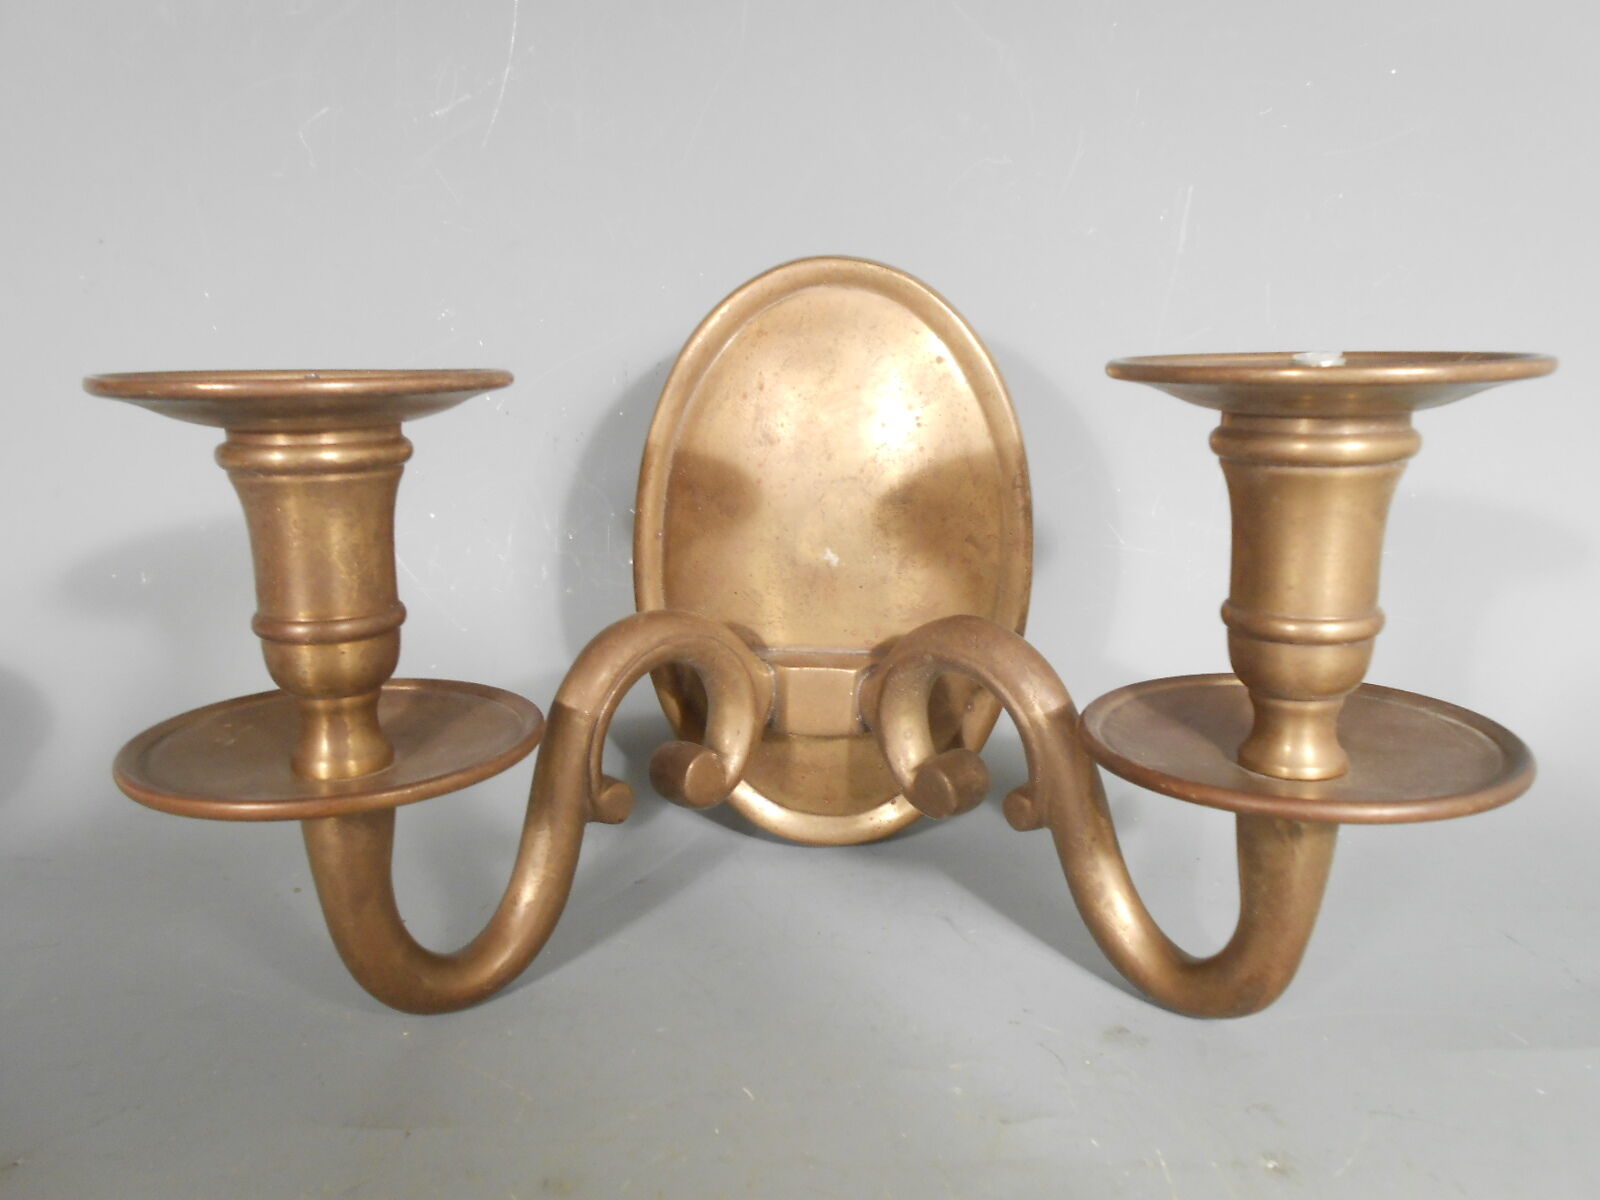 Candle Brass Wall Sconce w/ Electric Light Fixture Conversion ca. 19-20th c.